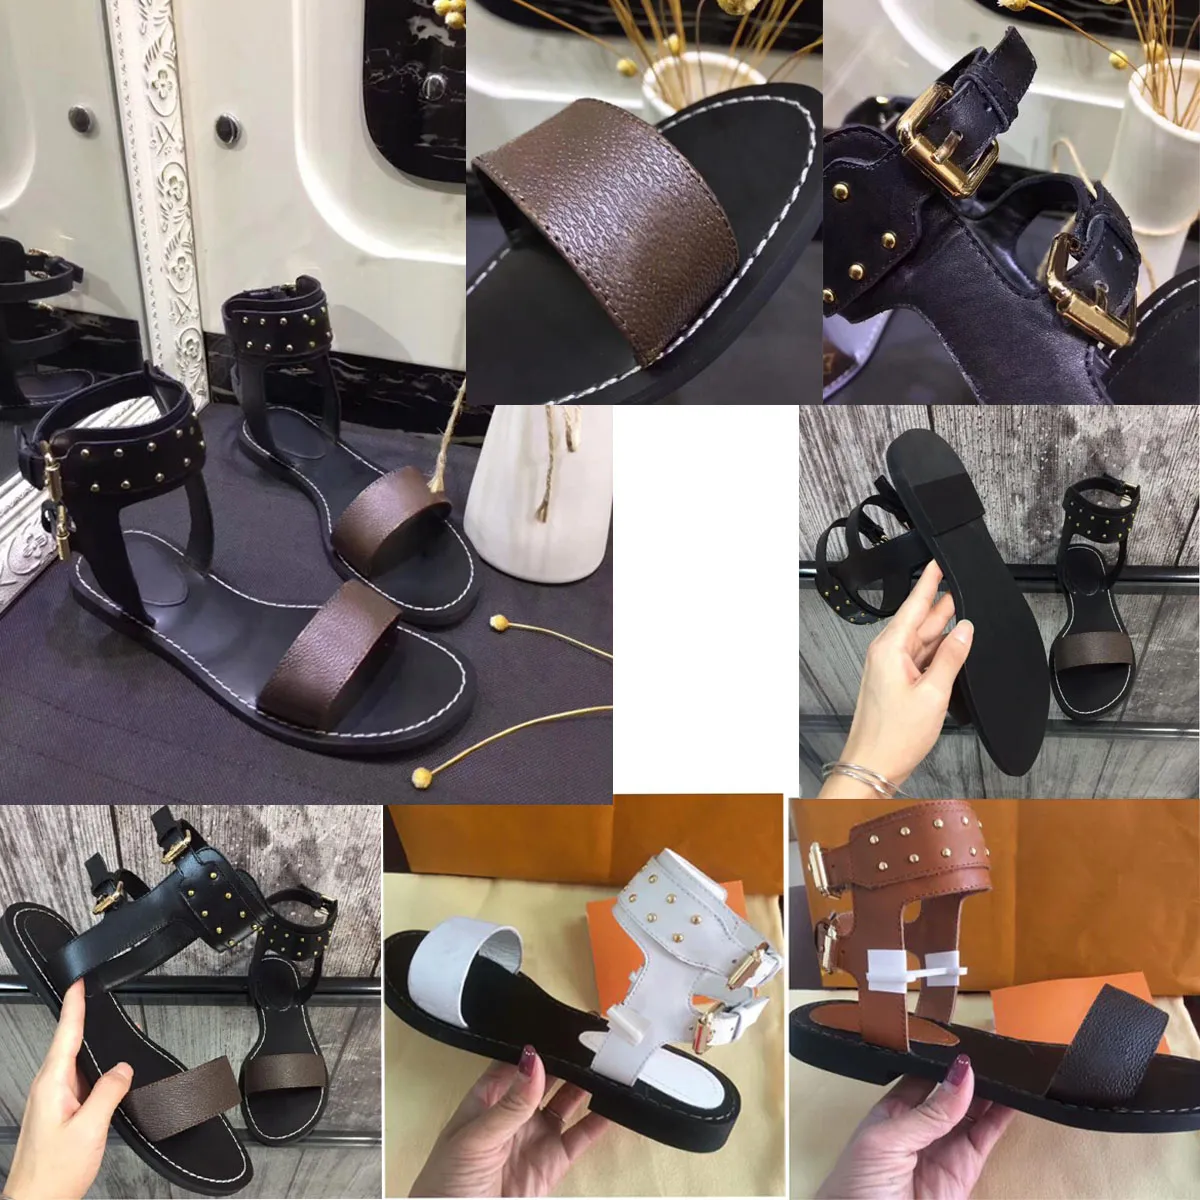 Luxury Women Canvas Sandals Summer Casual Flat Rivets Sandals Style Party Sexy Ladies Shoes 44